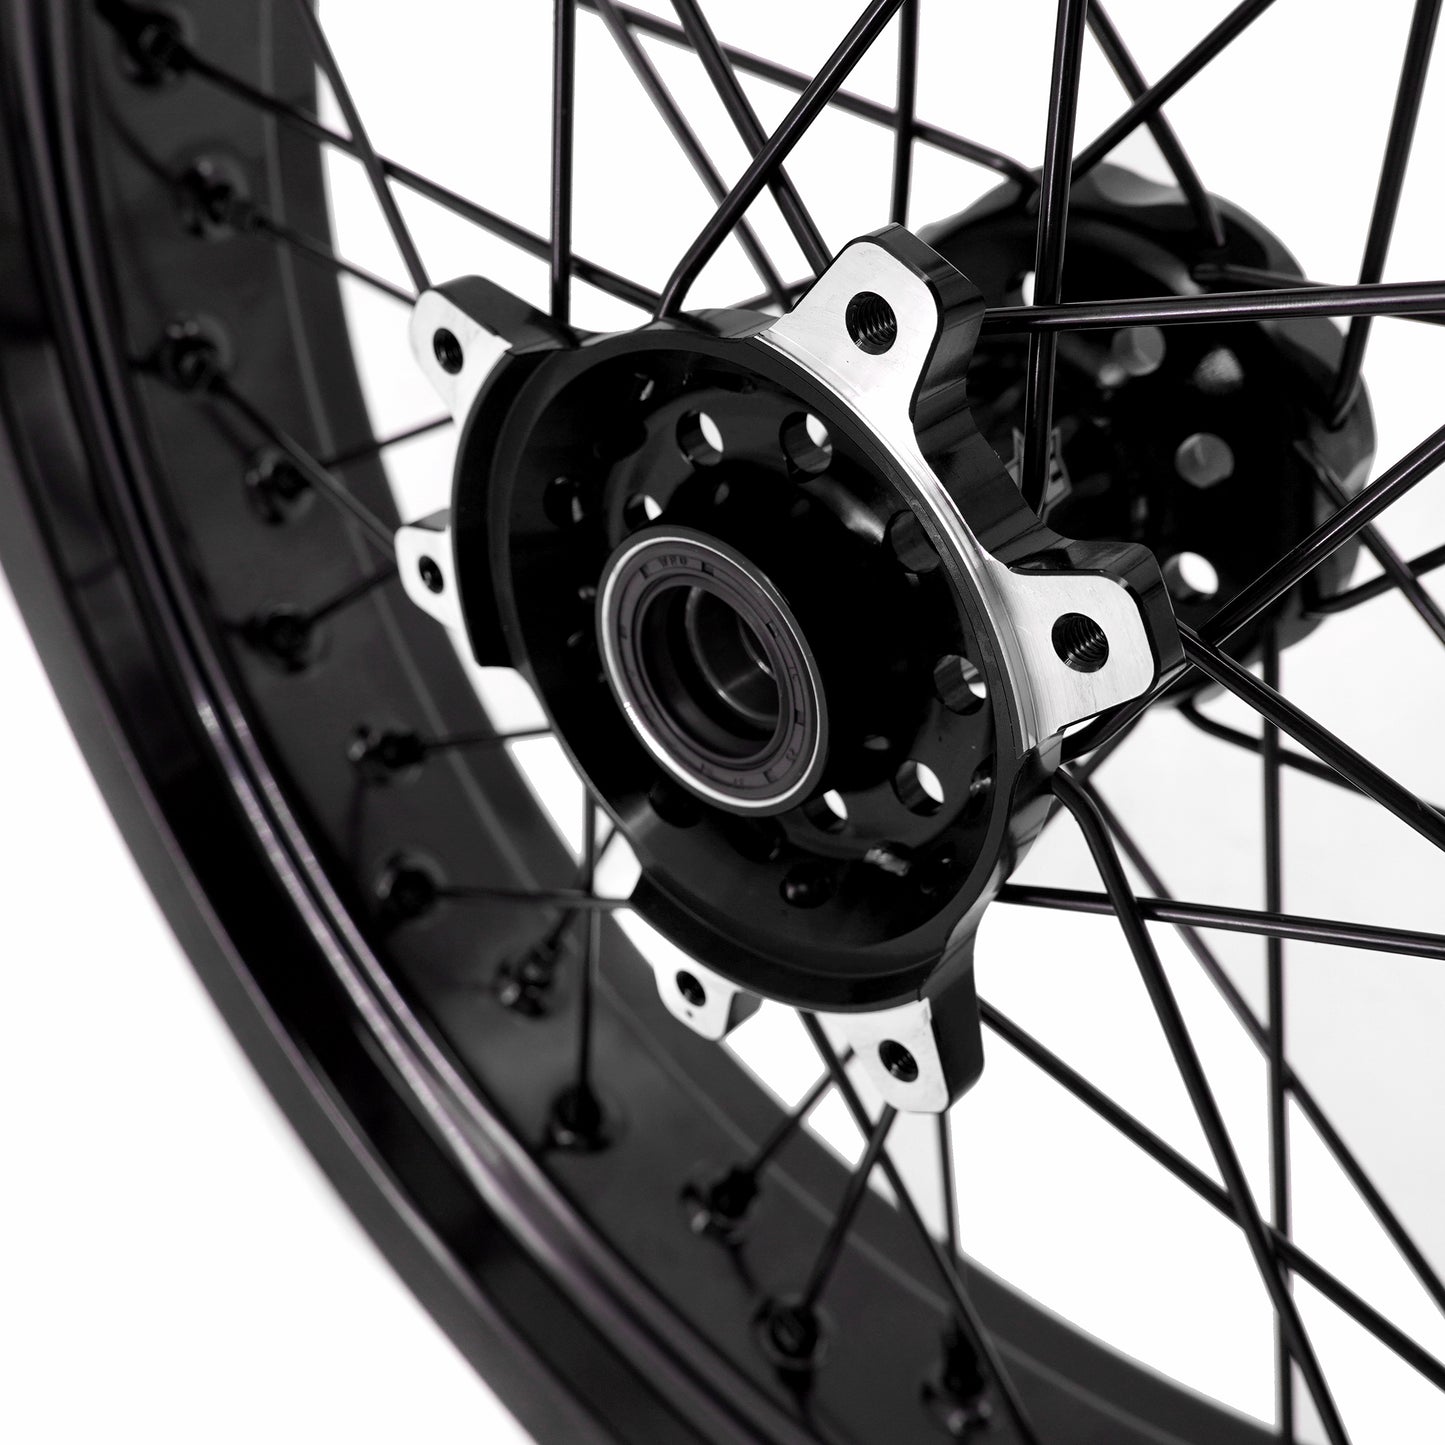 China Stock KKE 3.5/4.25*17" Electric Supermoto All Black Wheels Rim Fit For SurRon Ultra Bee 2023-2024